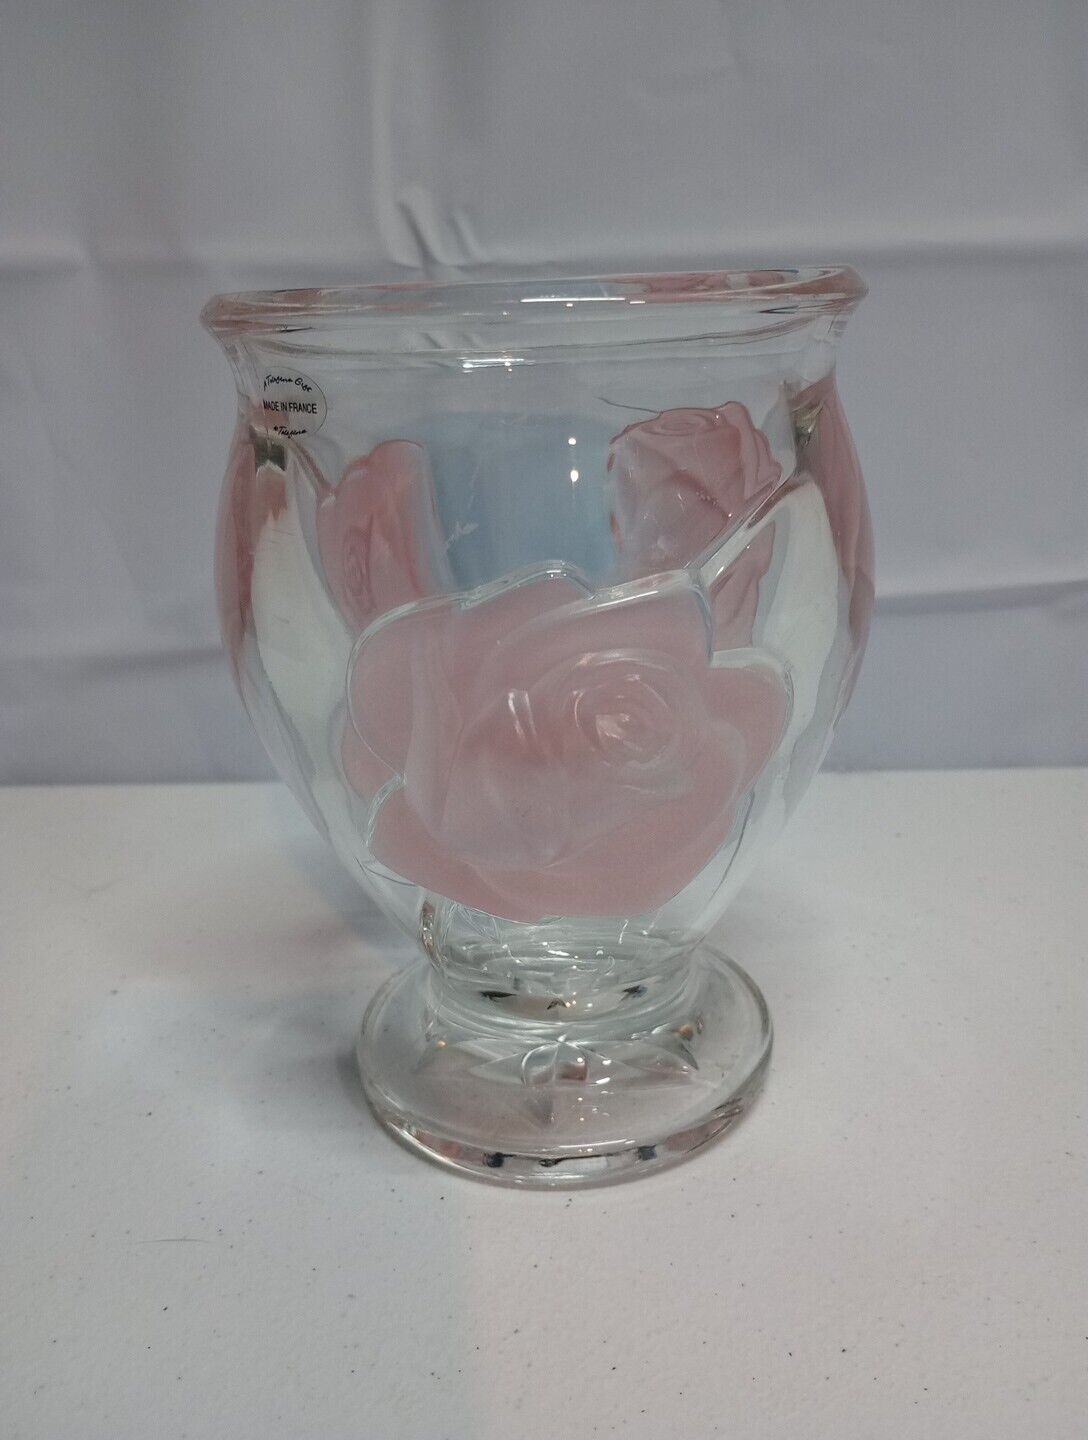 Teleflora Clear Glass Vase with Pink Frosted Embossed Roses Made In France